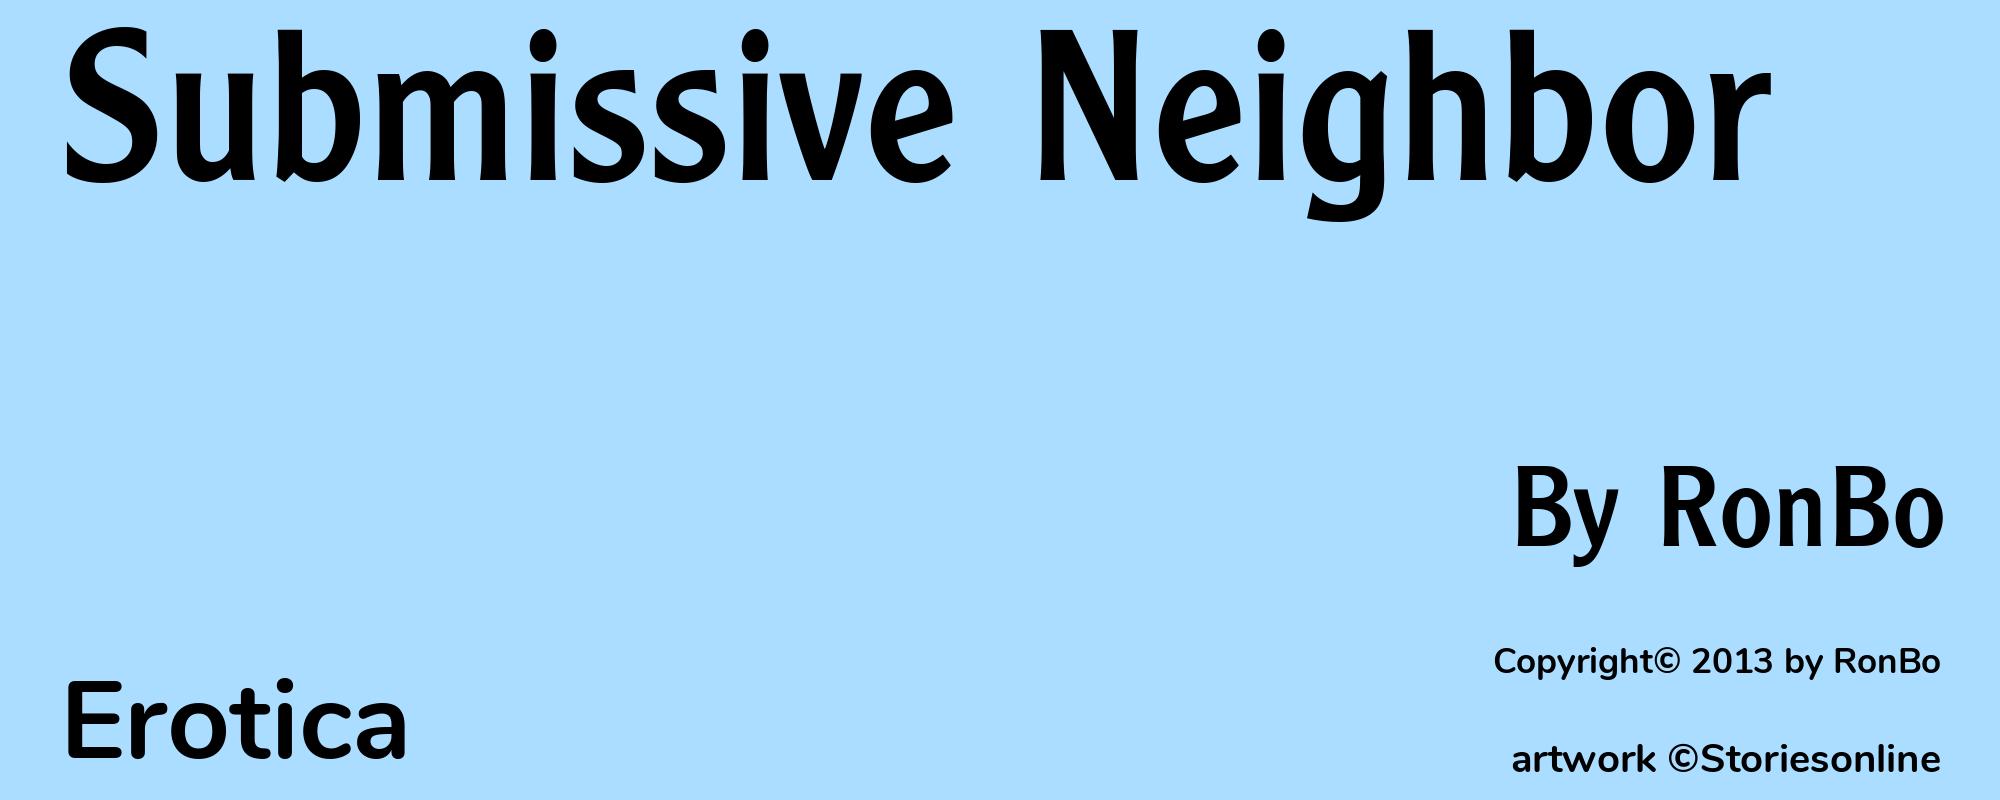 Submissive Neighbor - Cover